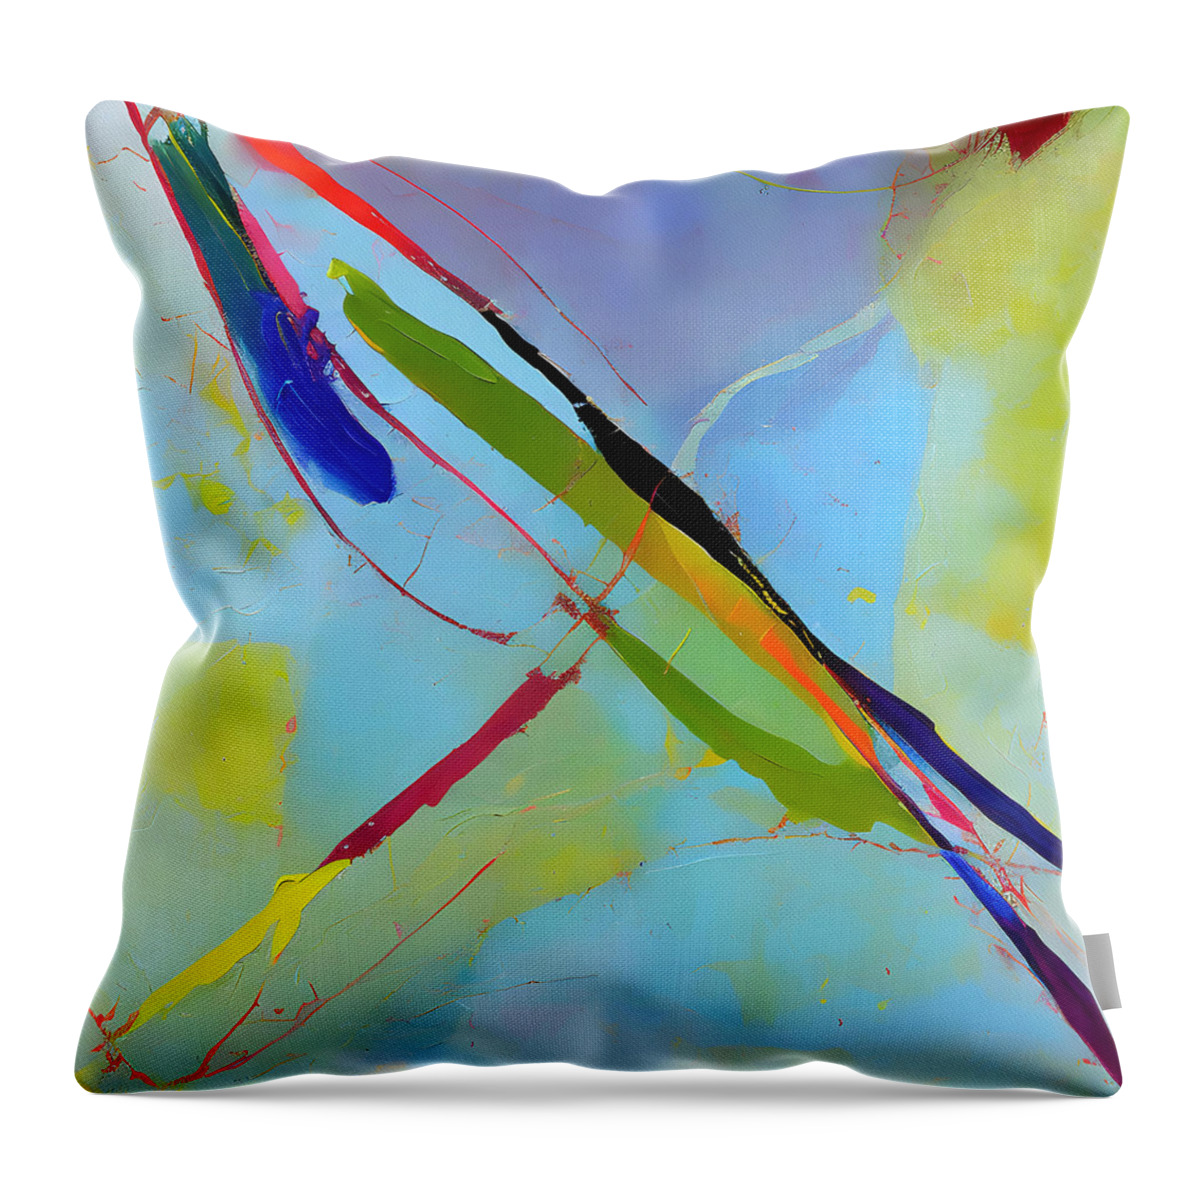 Abstract Throw Pillow featuring the painting Colorful Modern Minimalist Abstract Lines by Abstract Factory